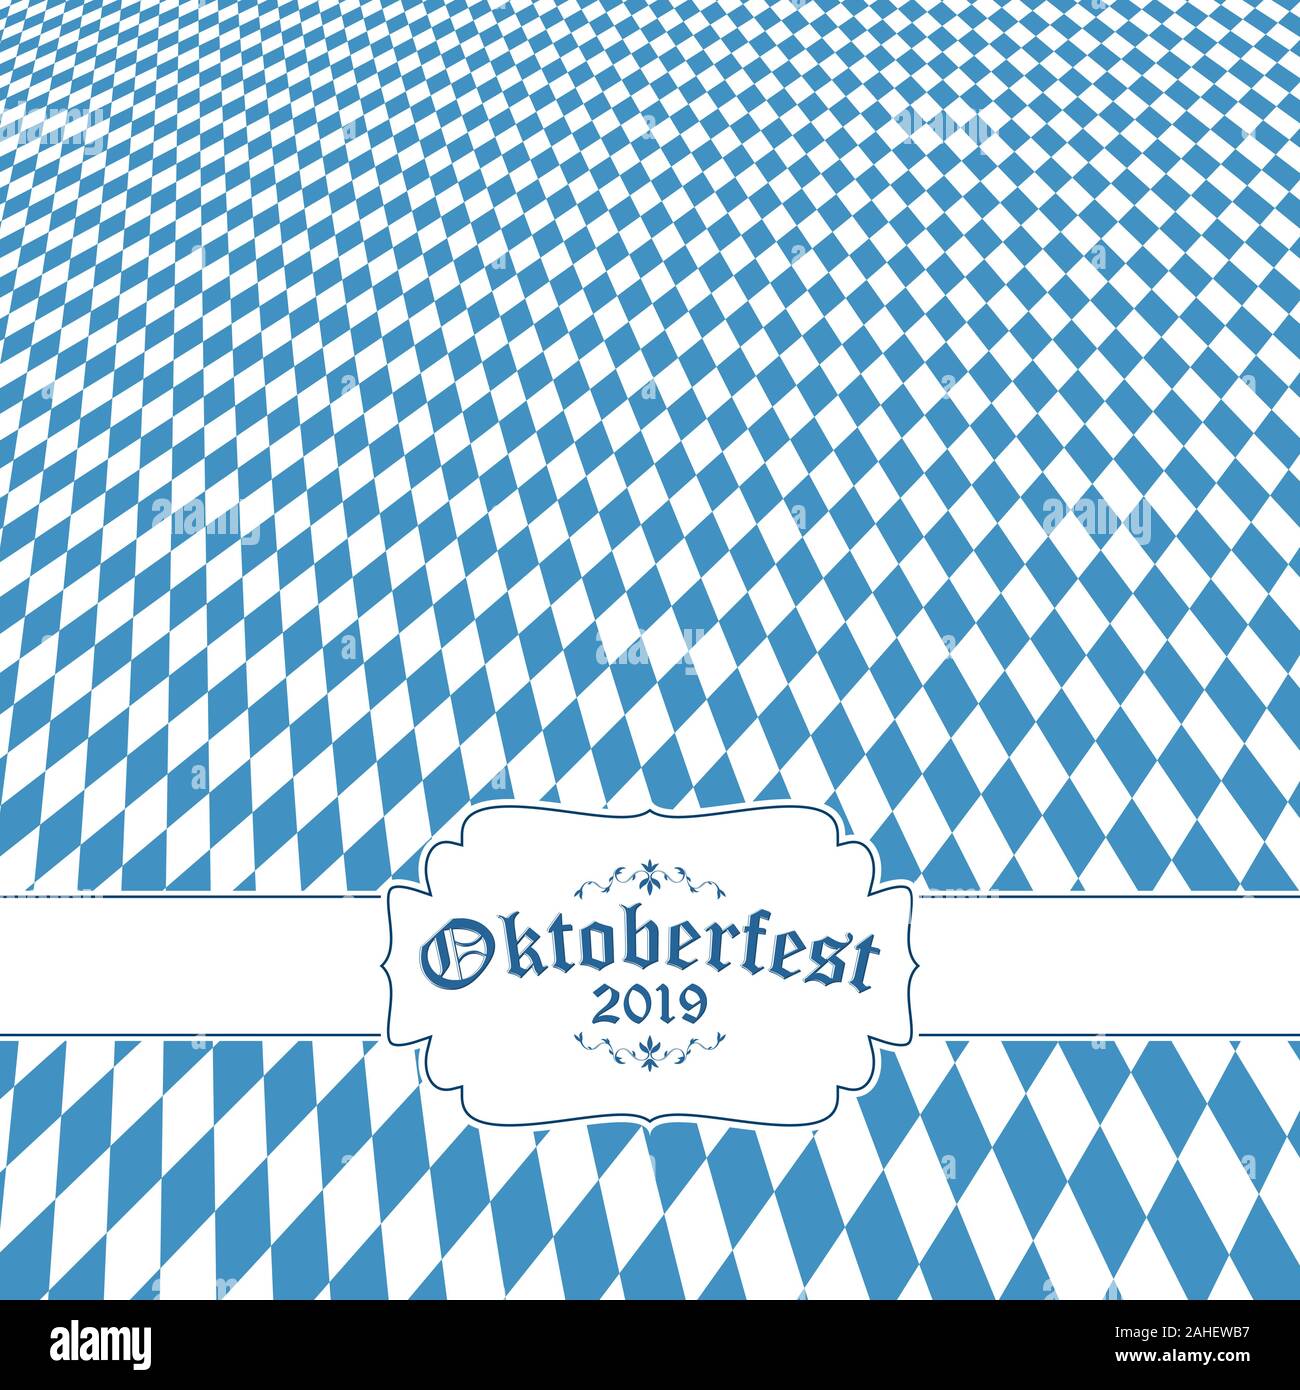 Oktoberfest background with blue-white checkered pattern, banner and text Oktoberfest 2019 (in german) Stock Vector